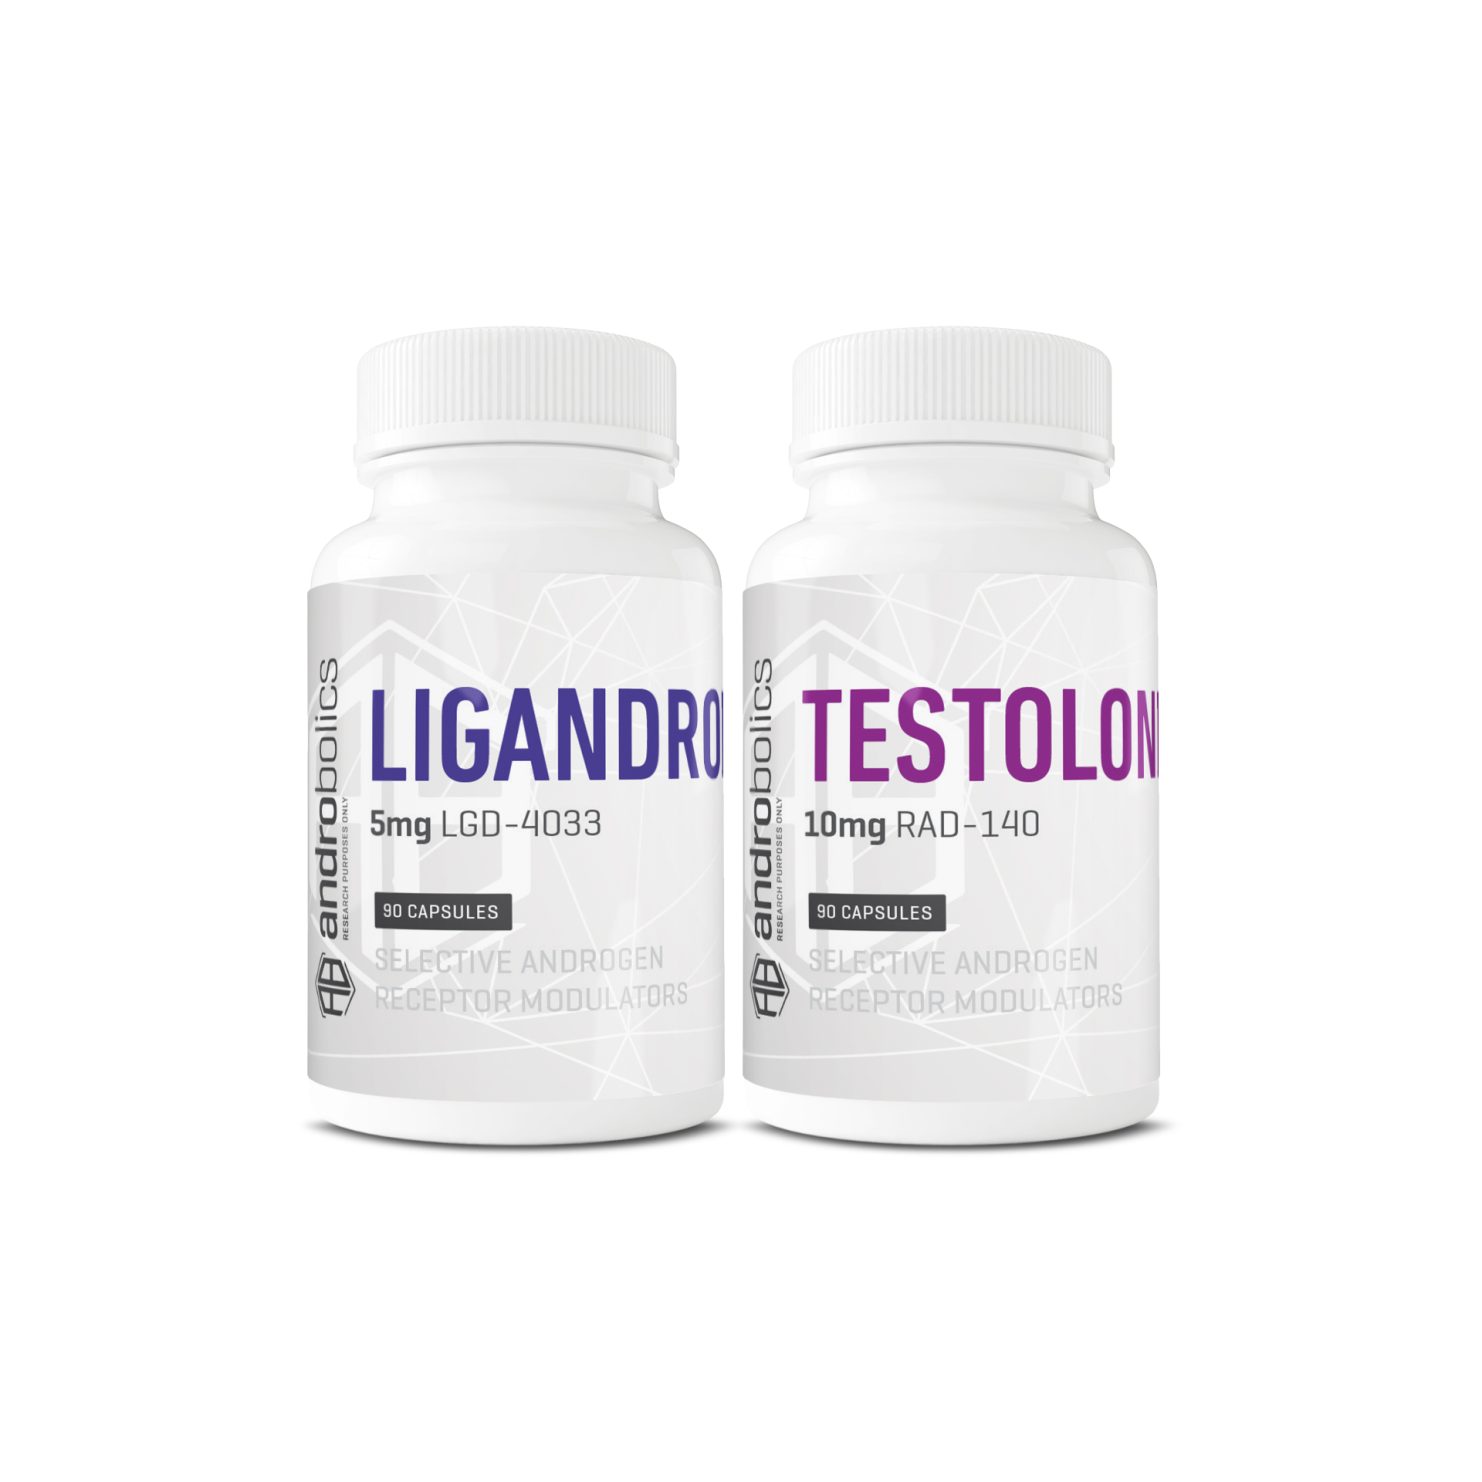 Essential Muscle Mass SARMs Stack with Ligandrol and Testolone bottles from Androbolics.